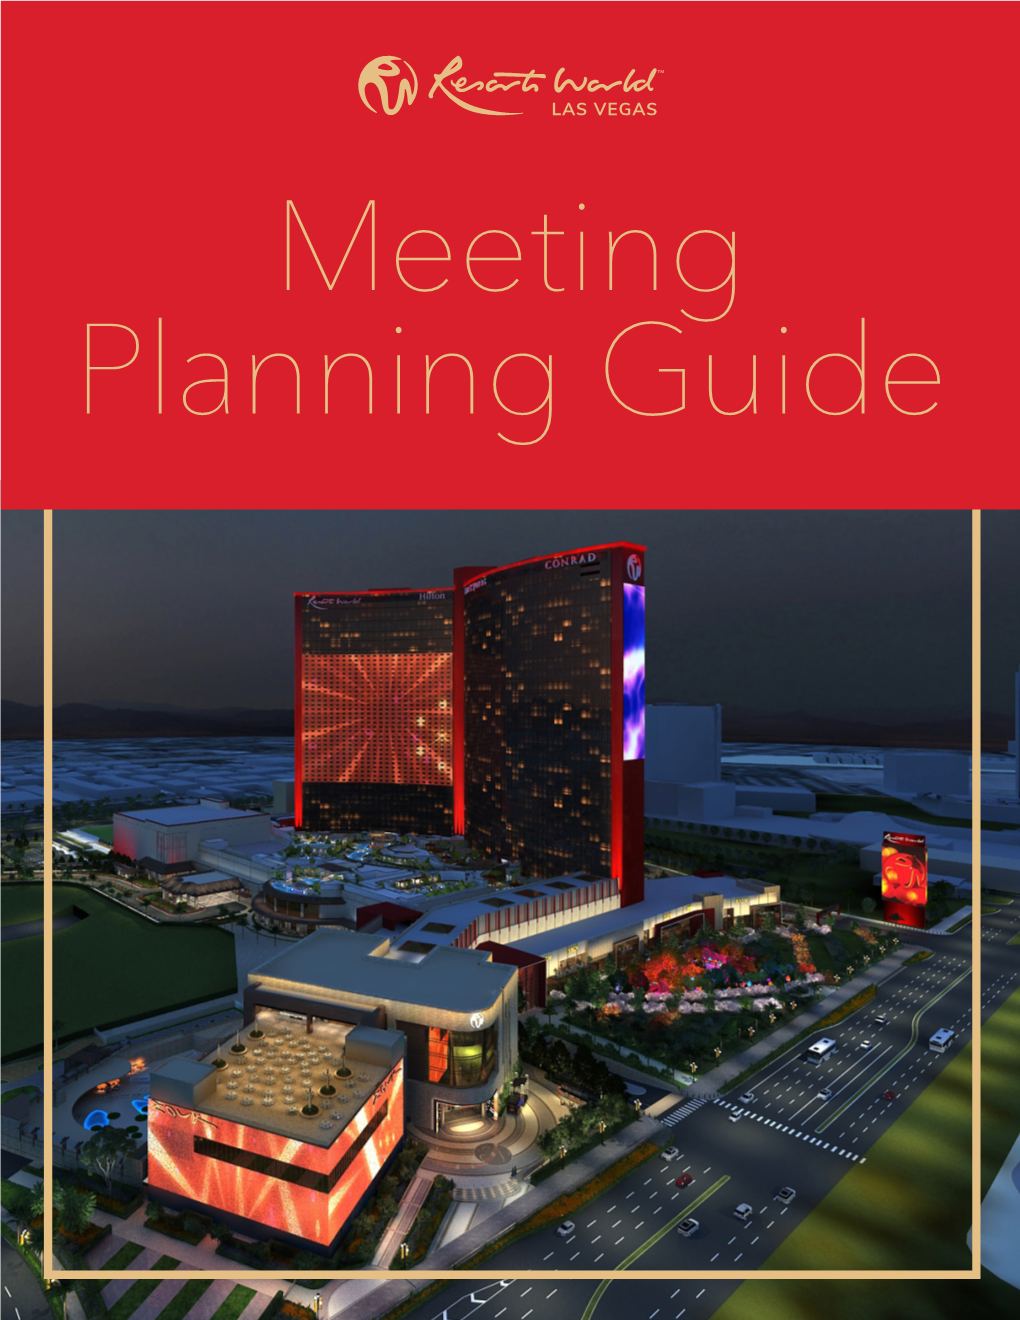 Explore Our Meeting Planner Guide